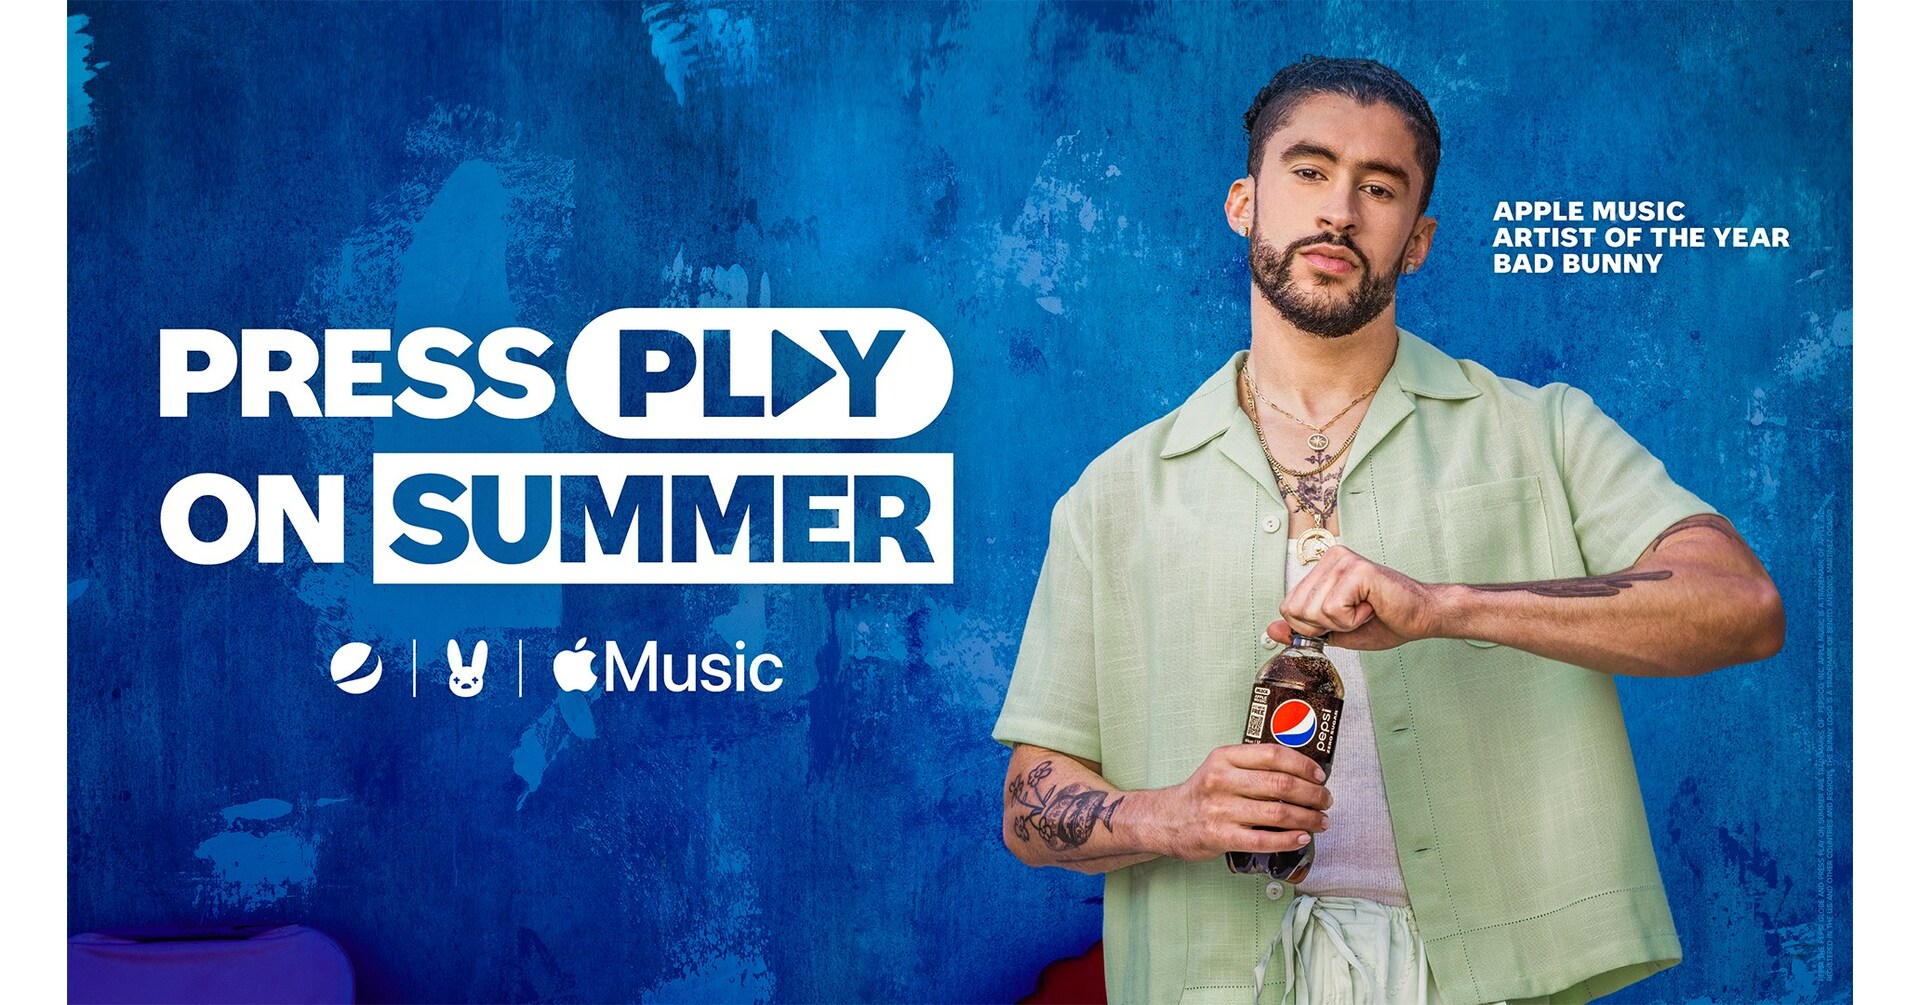 PEPSI® AND BAD BUNNY INVITE CONSUMERS NATIONWIDE TO PRESS PLAY ON SUMMER  WITH NEW CAMPAIGN